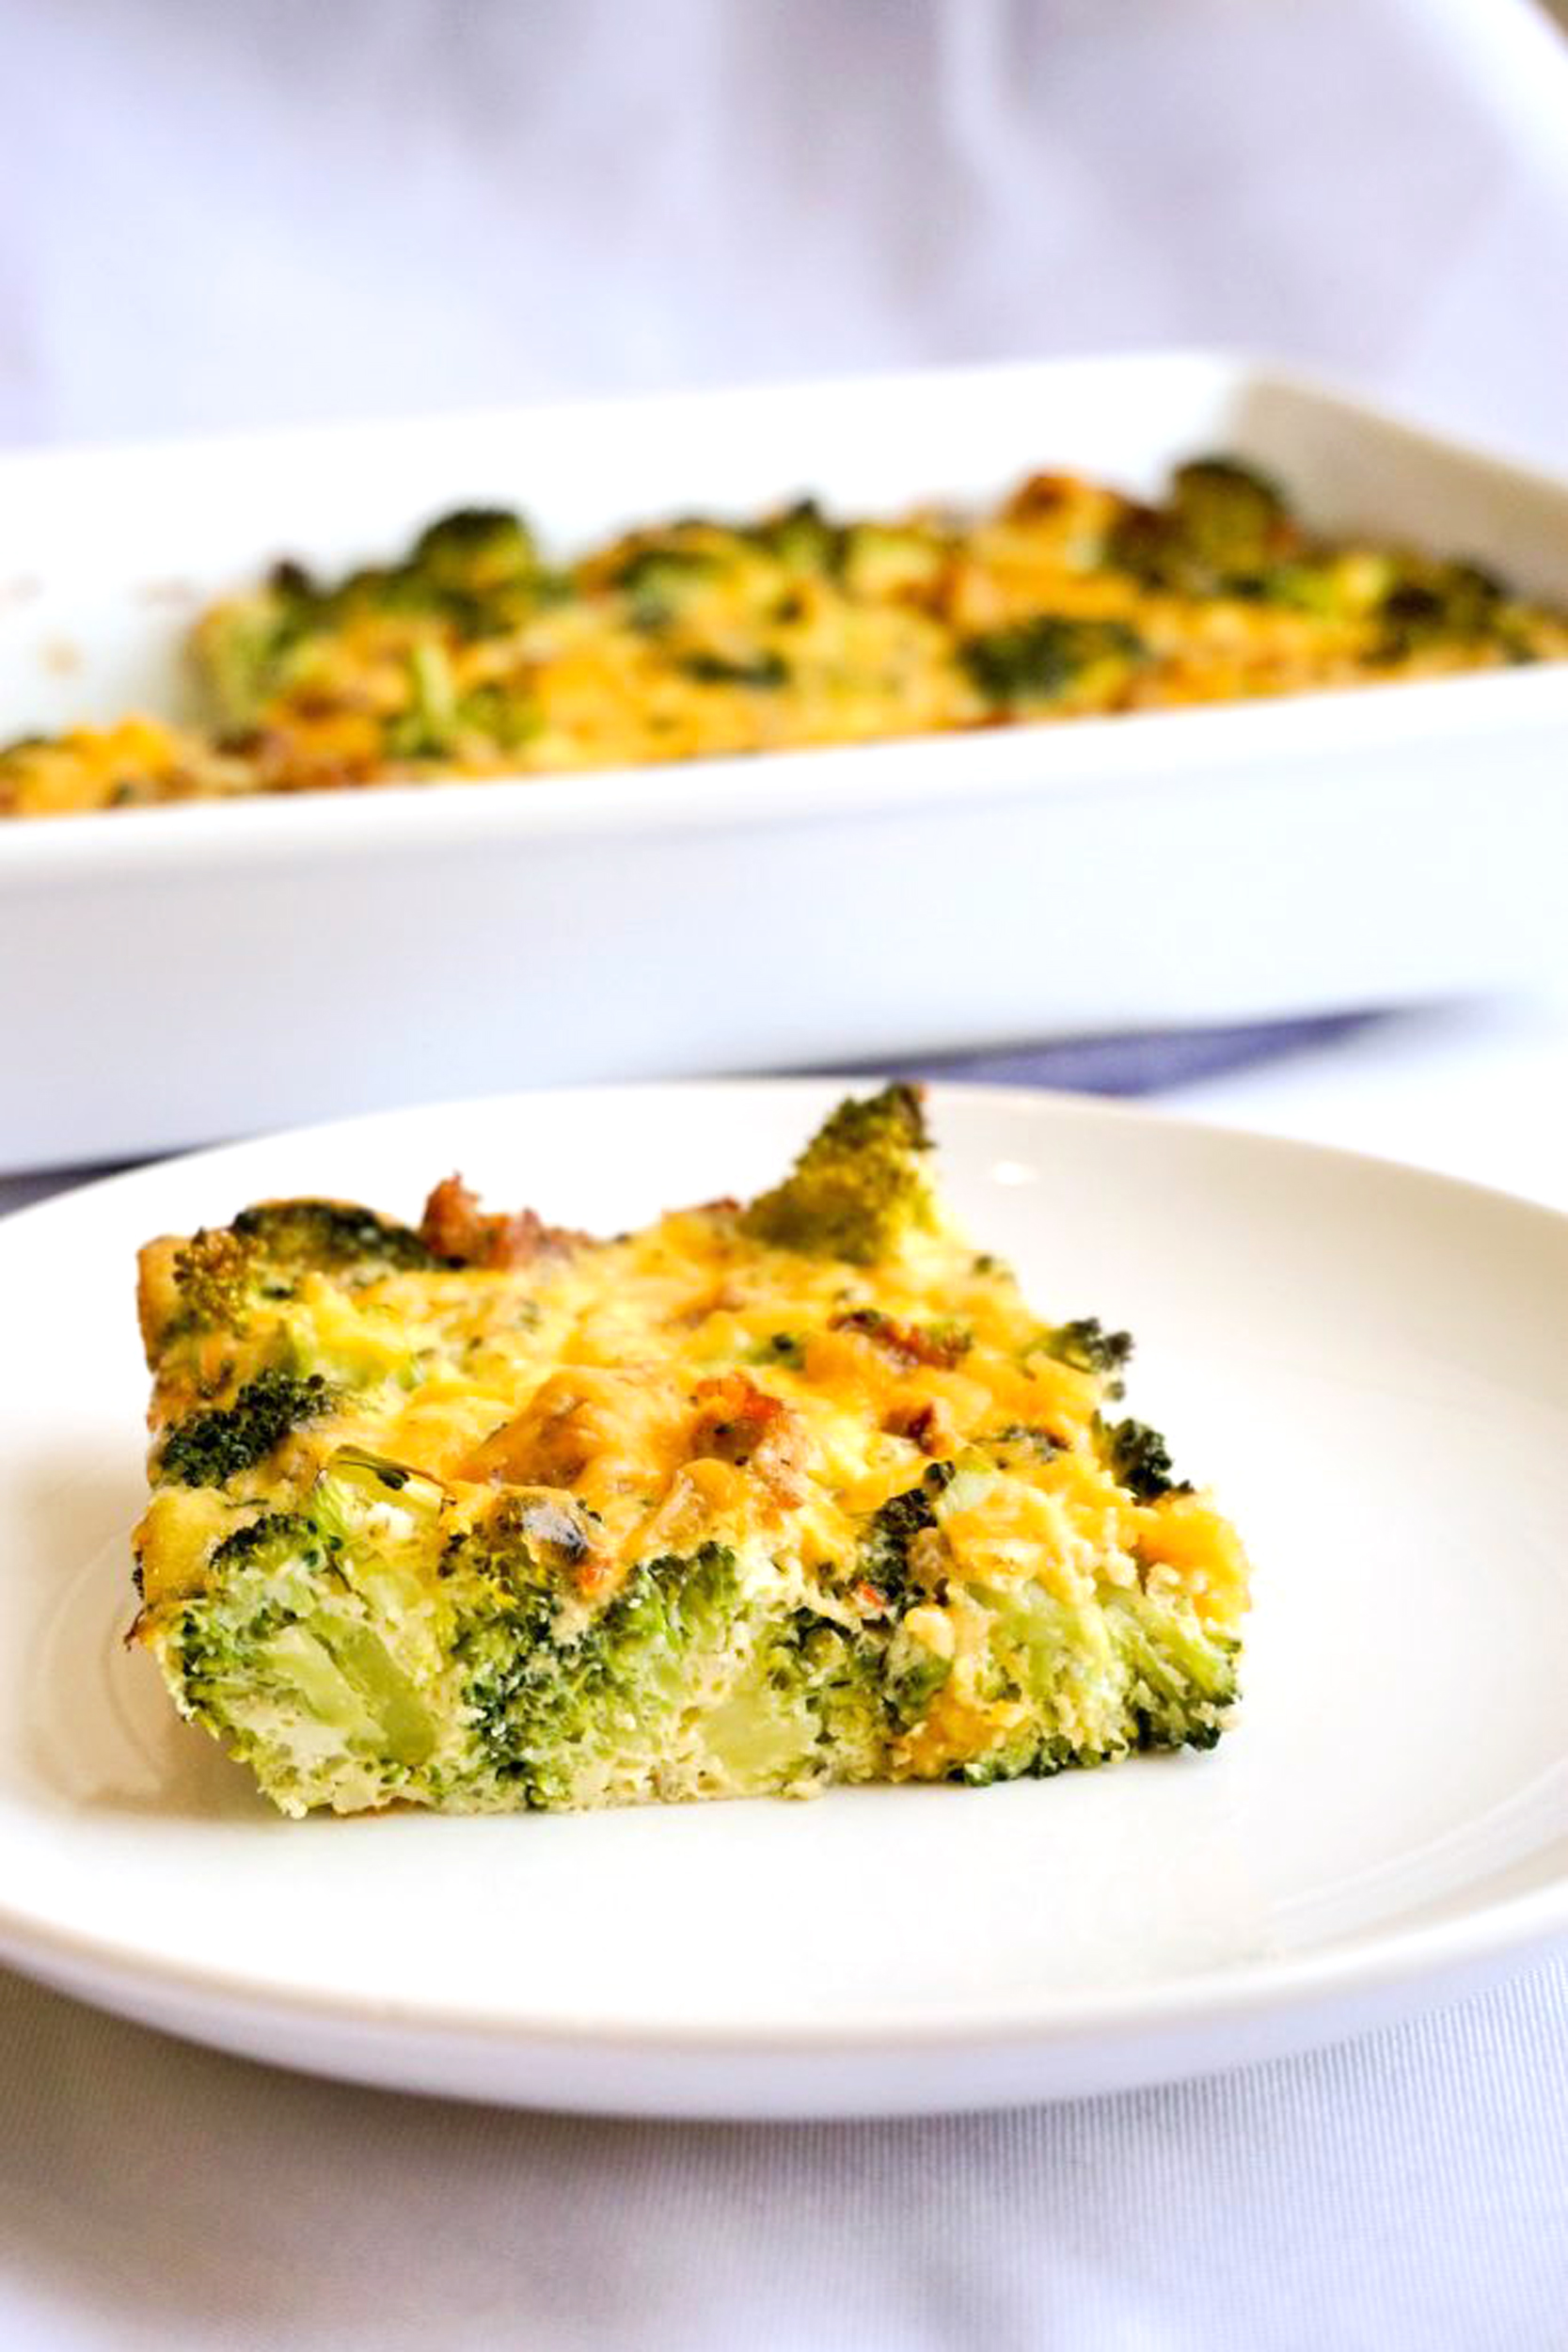 PHOTO: Low-carb breakfast casserole by Ketoconnect.com is pictured.